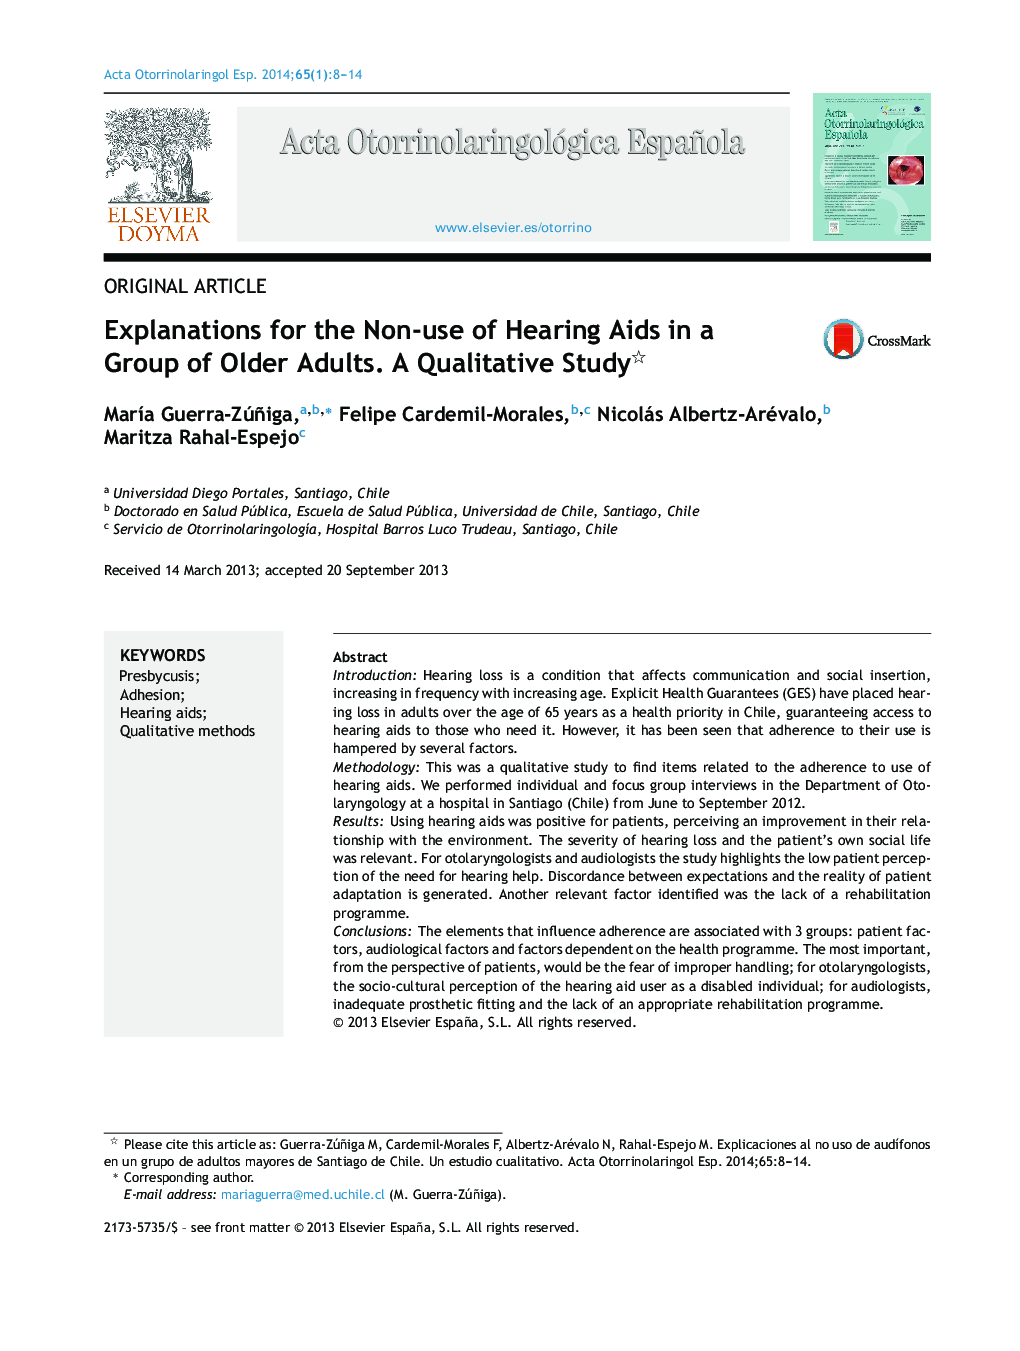 Explanations for the Non-use of Hearing Aids in a Group of Older Adults. A Qualitative Study 